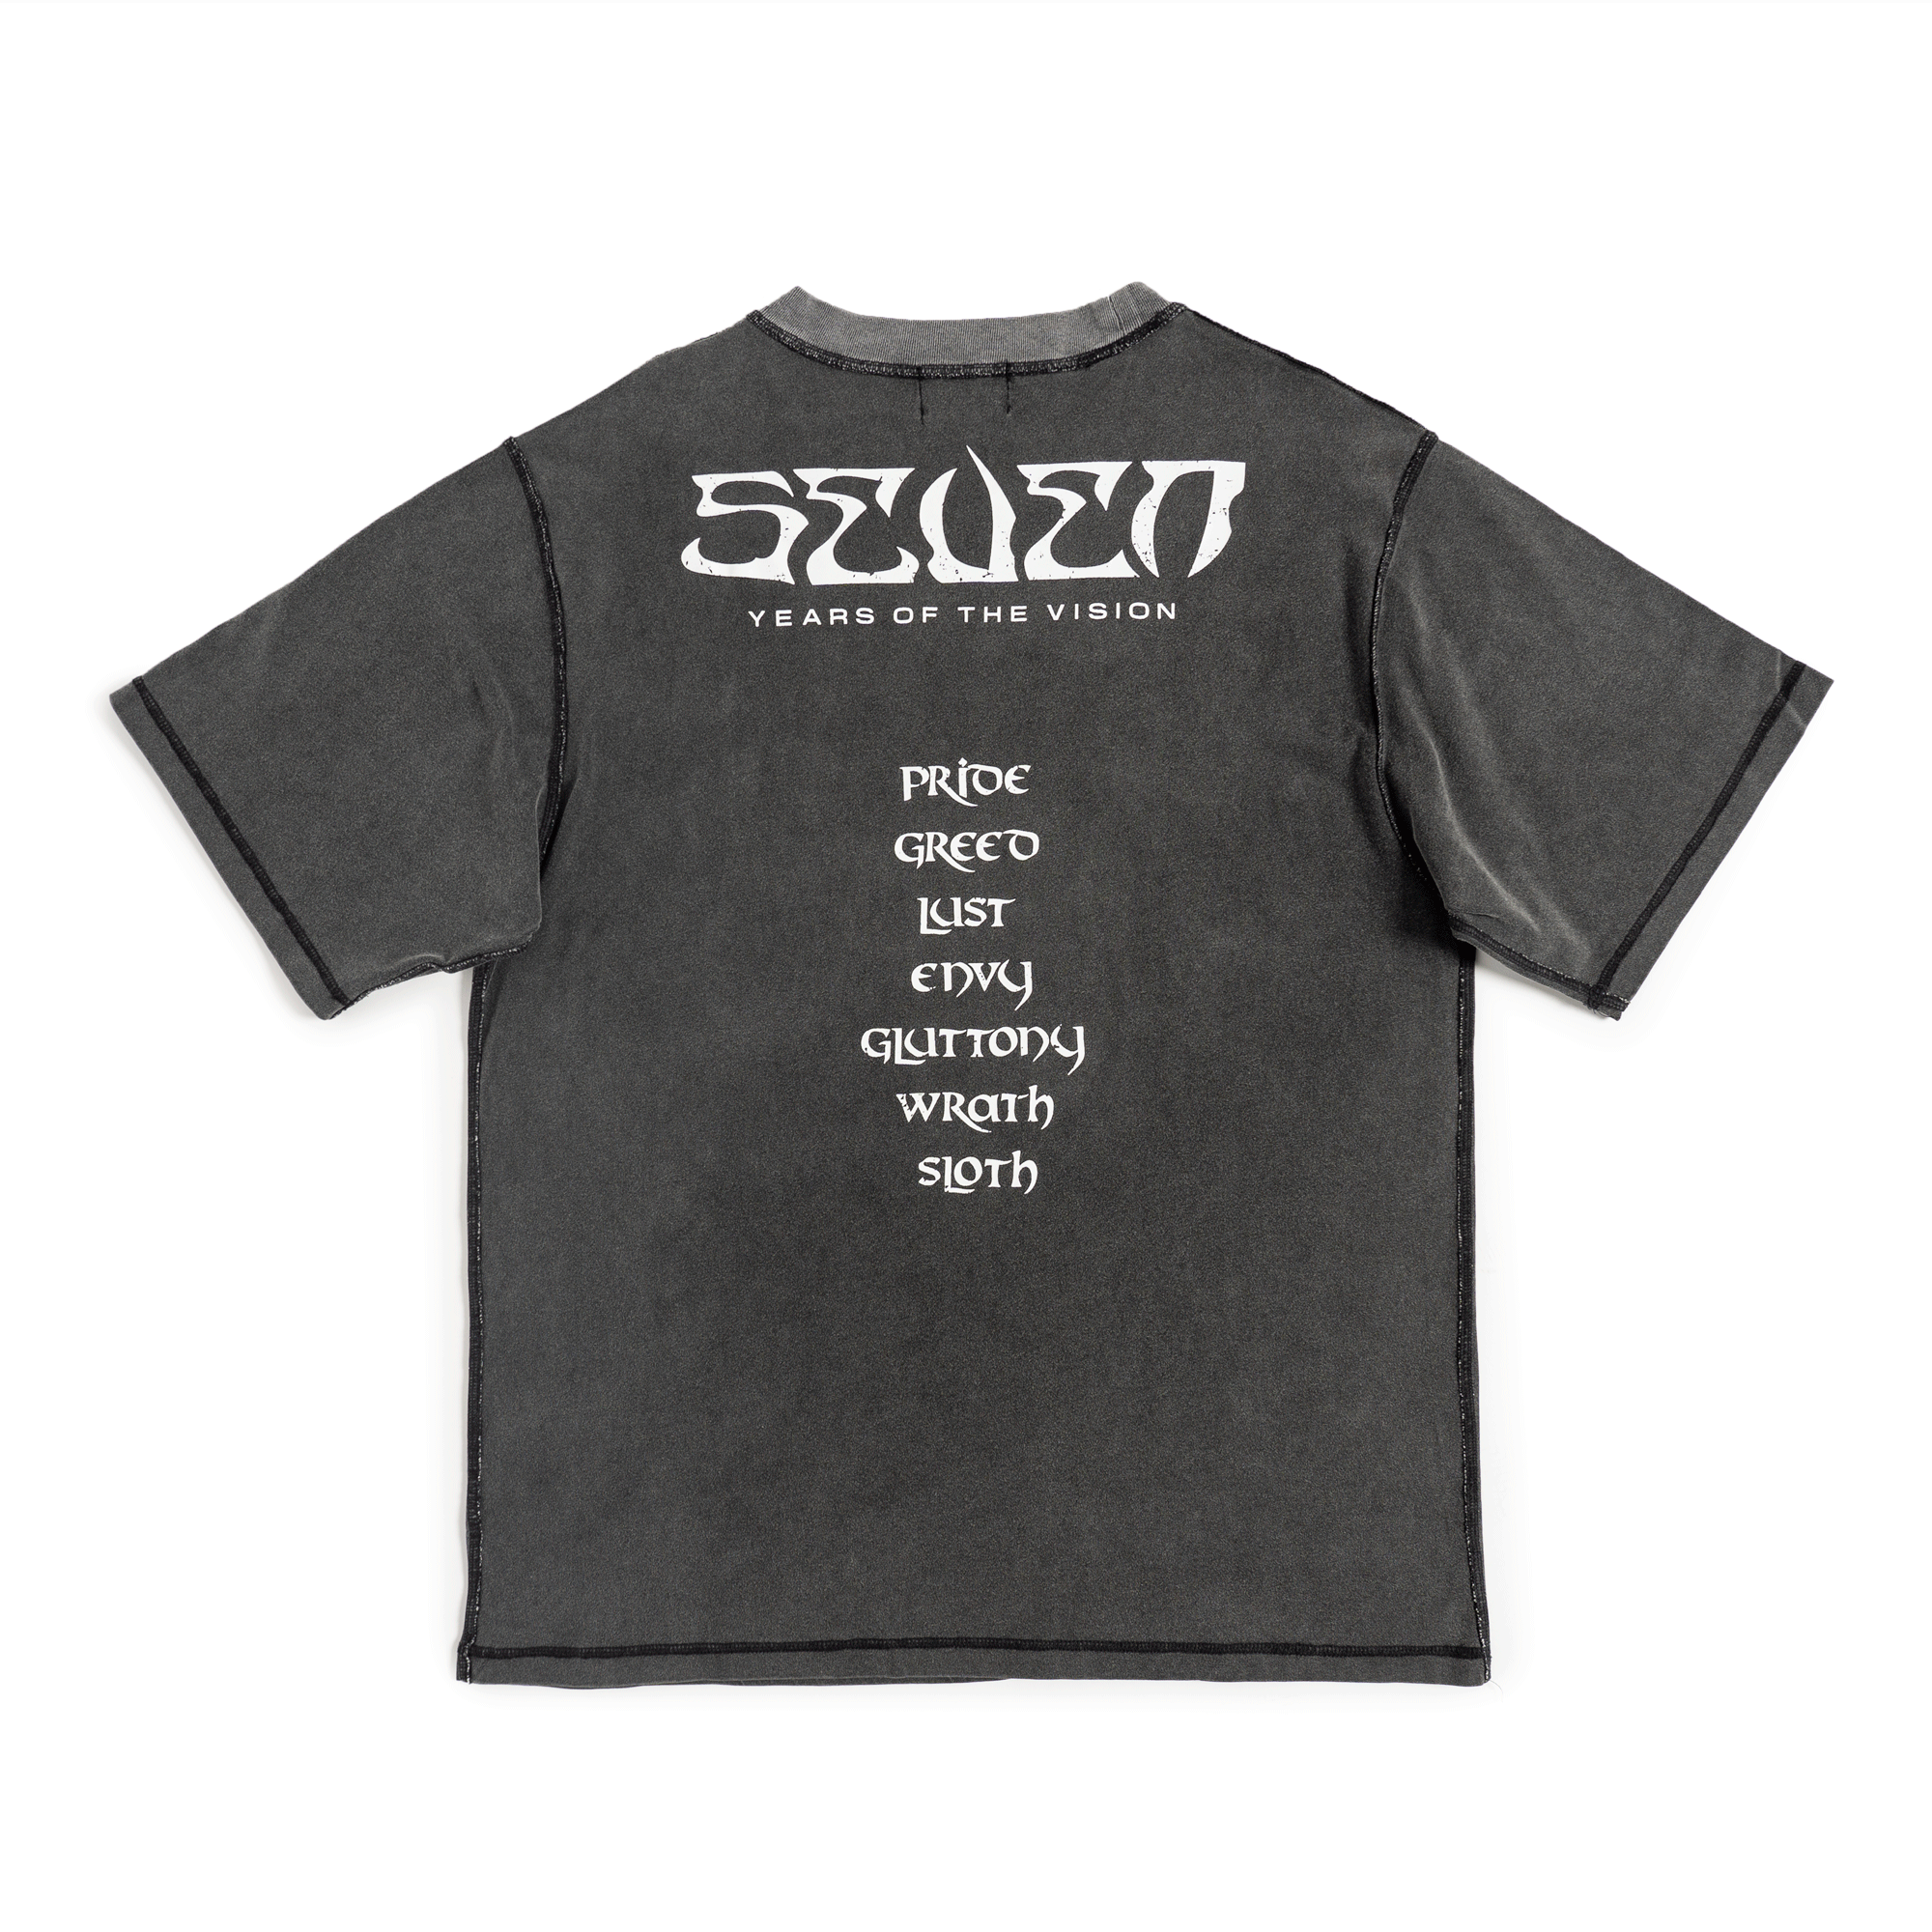 "SEVEN YEARS OF THE VISION" Oversized Shirt